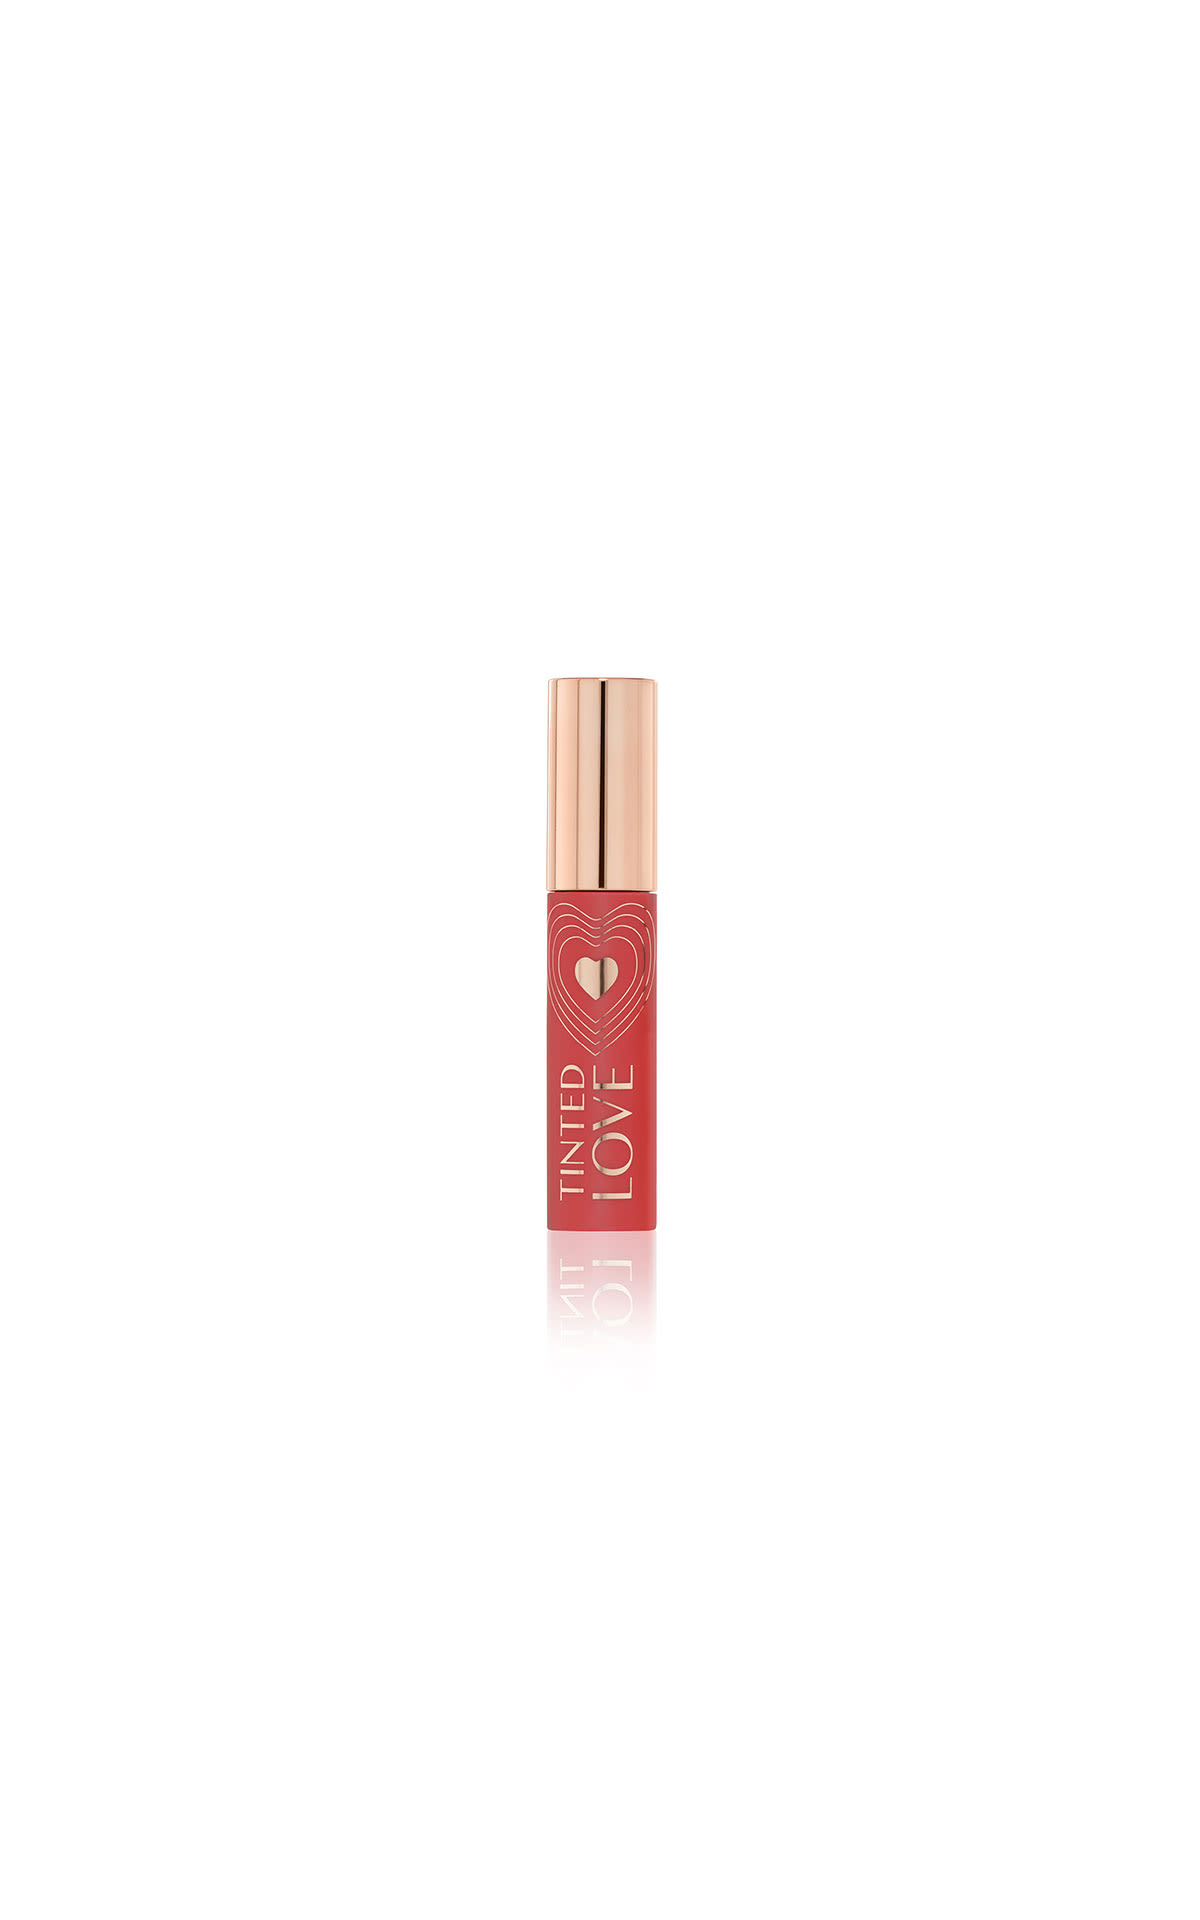 Charlotte Tilbury Tinted love - bohemian kiss from Bicester Village